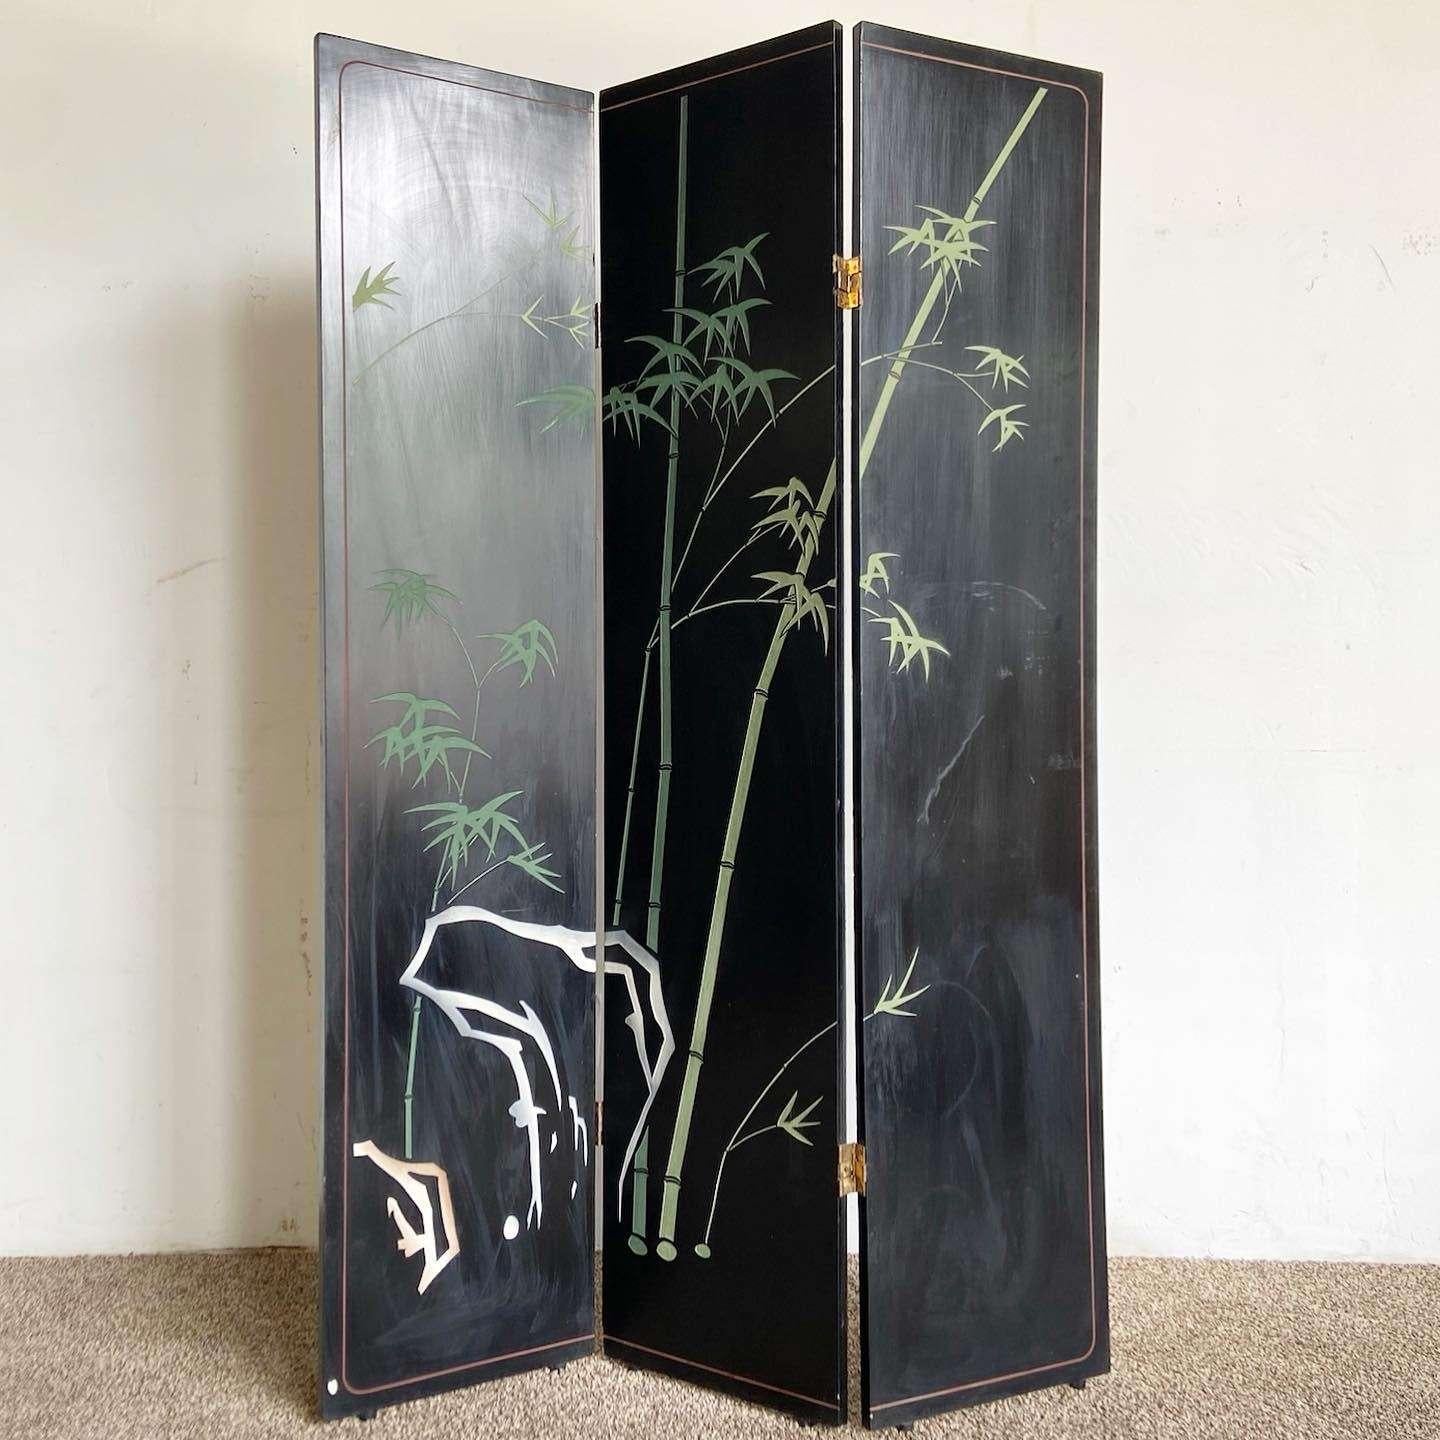 Chinese Hand Carved and Painted Room Divider - 3 Panels In Good Condition For Sale In Delray Beach, FL